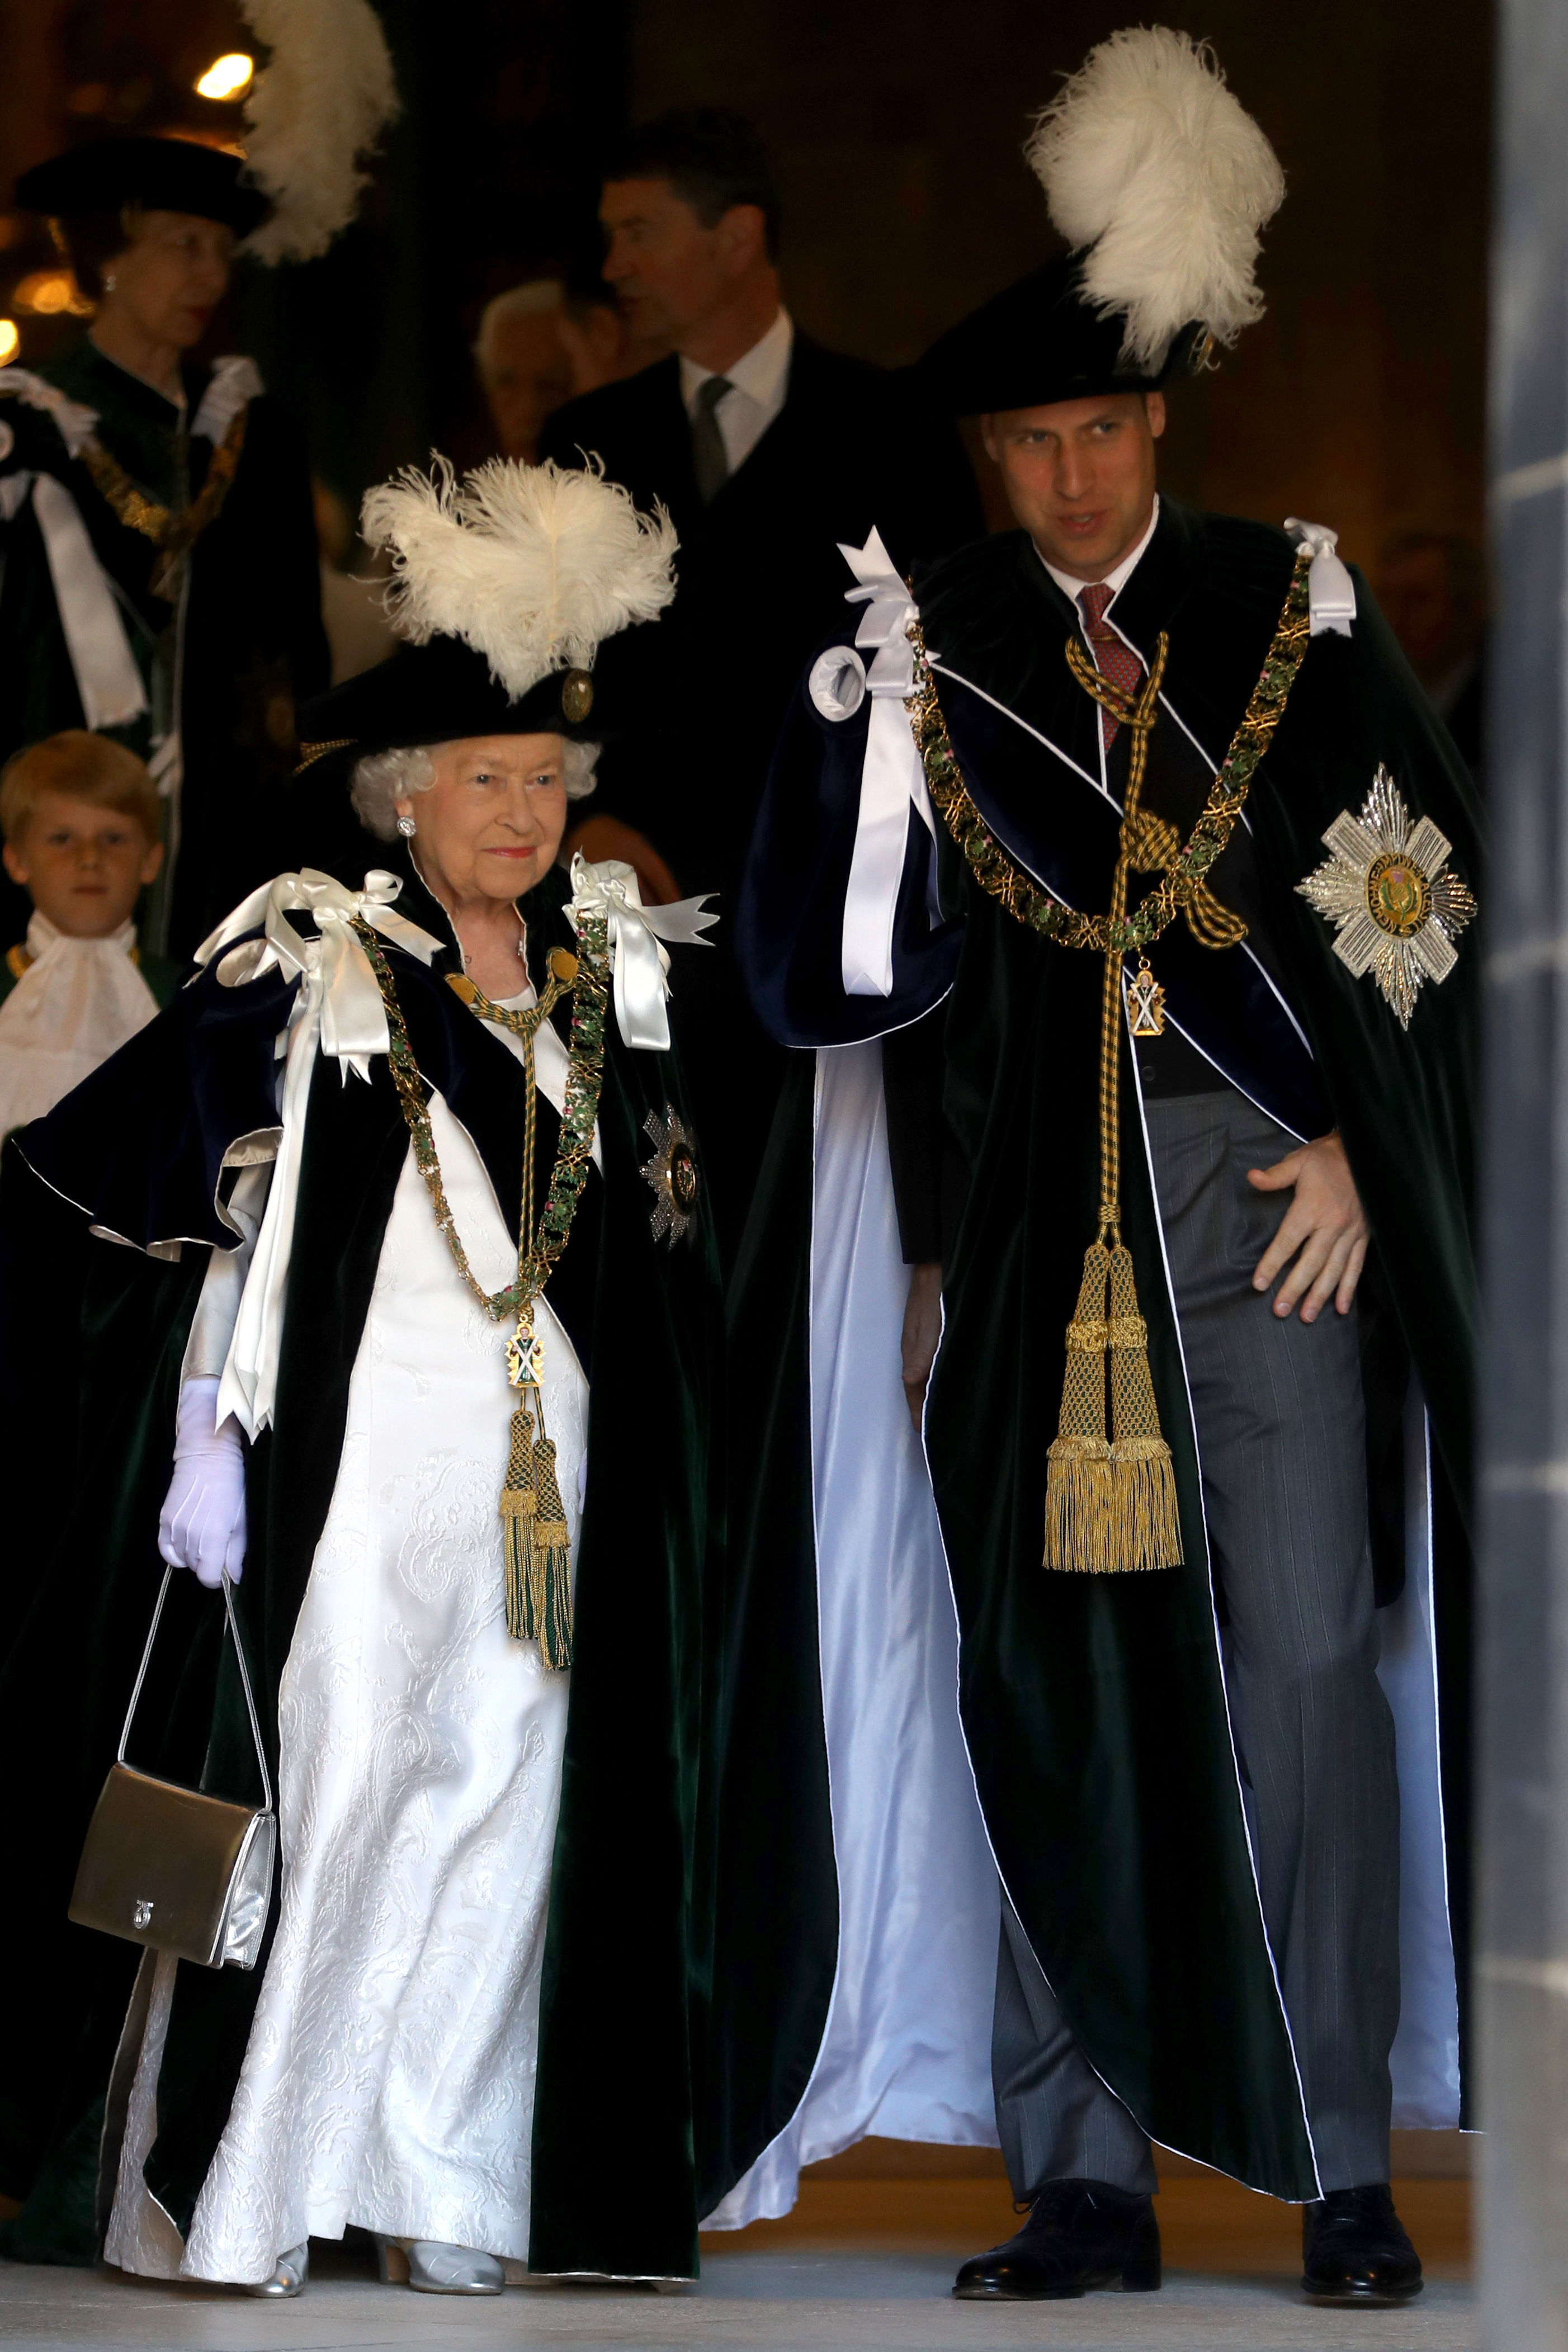 <p>Queen Elizabeth II and <a href="https://www.wonderwall.com/celebrity/profiles/overview/prince-william-482.article">Prince William</a> are seen leaving a service for the Order of the Thistle -- and ancient order of chivalry founded by King James VII of Scotland in 1687 -- at St. Giles Cathedral in Edinburgh, Scotland, on July 6, 2018.</p>